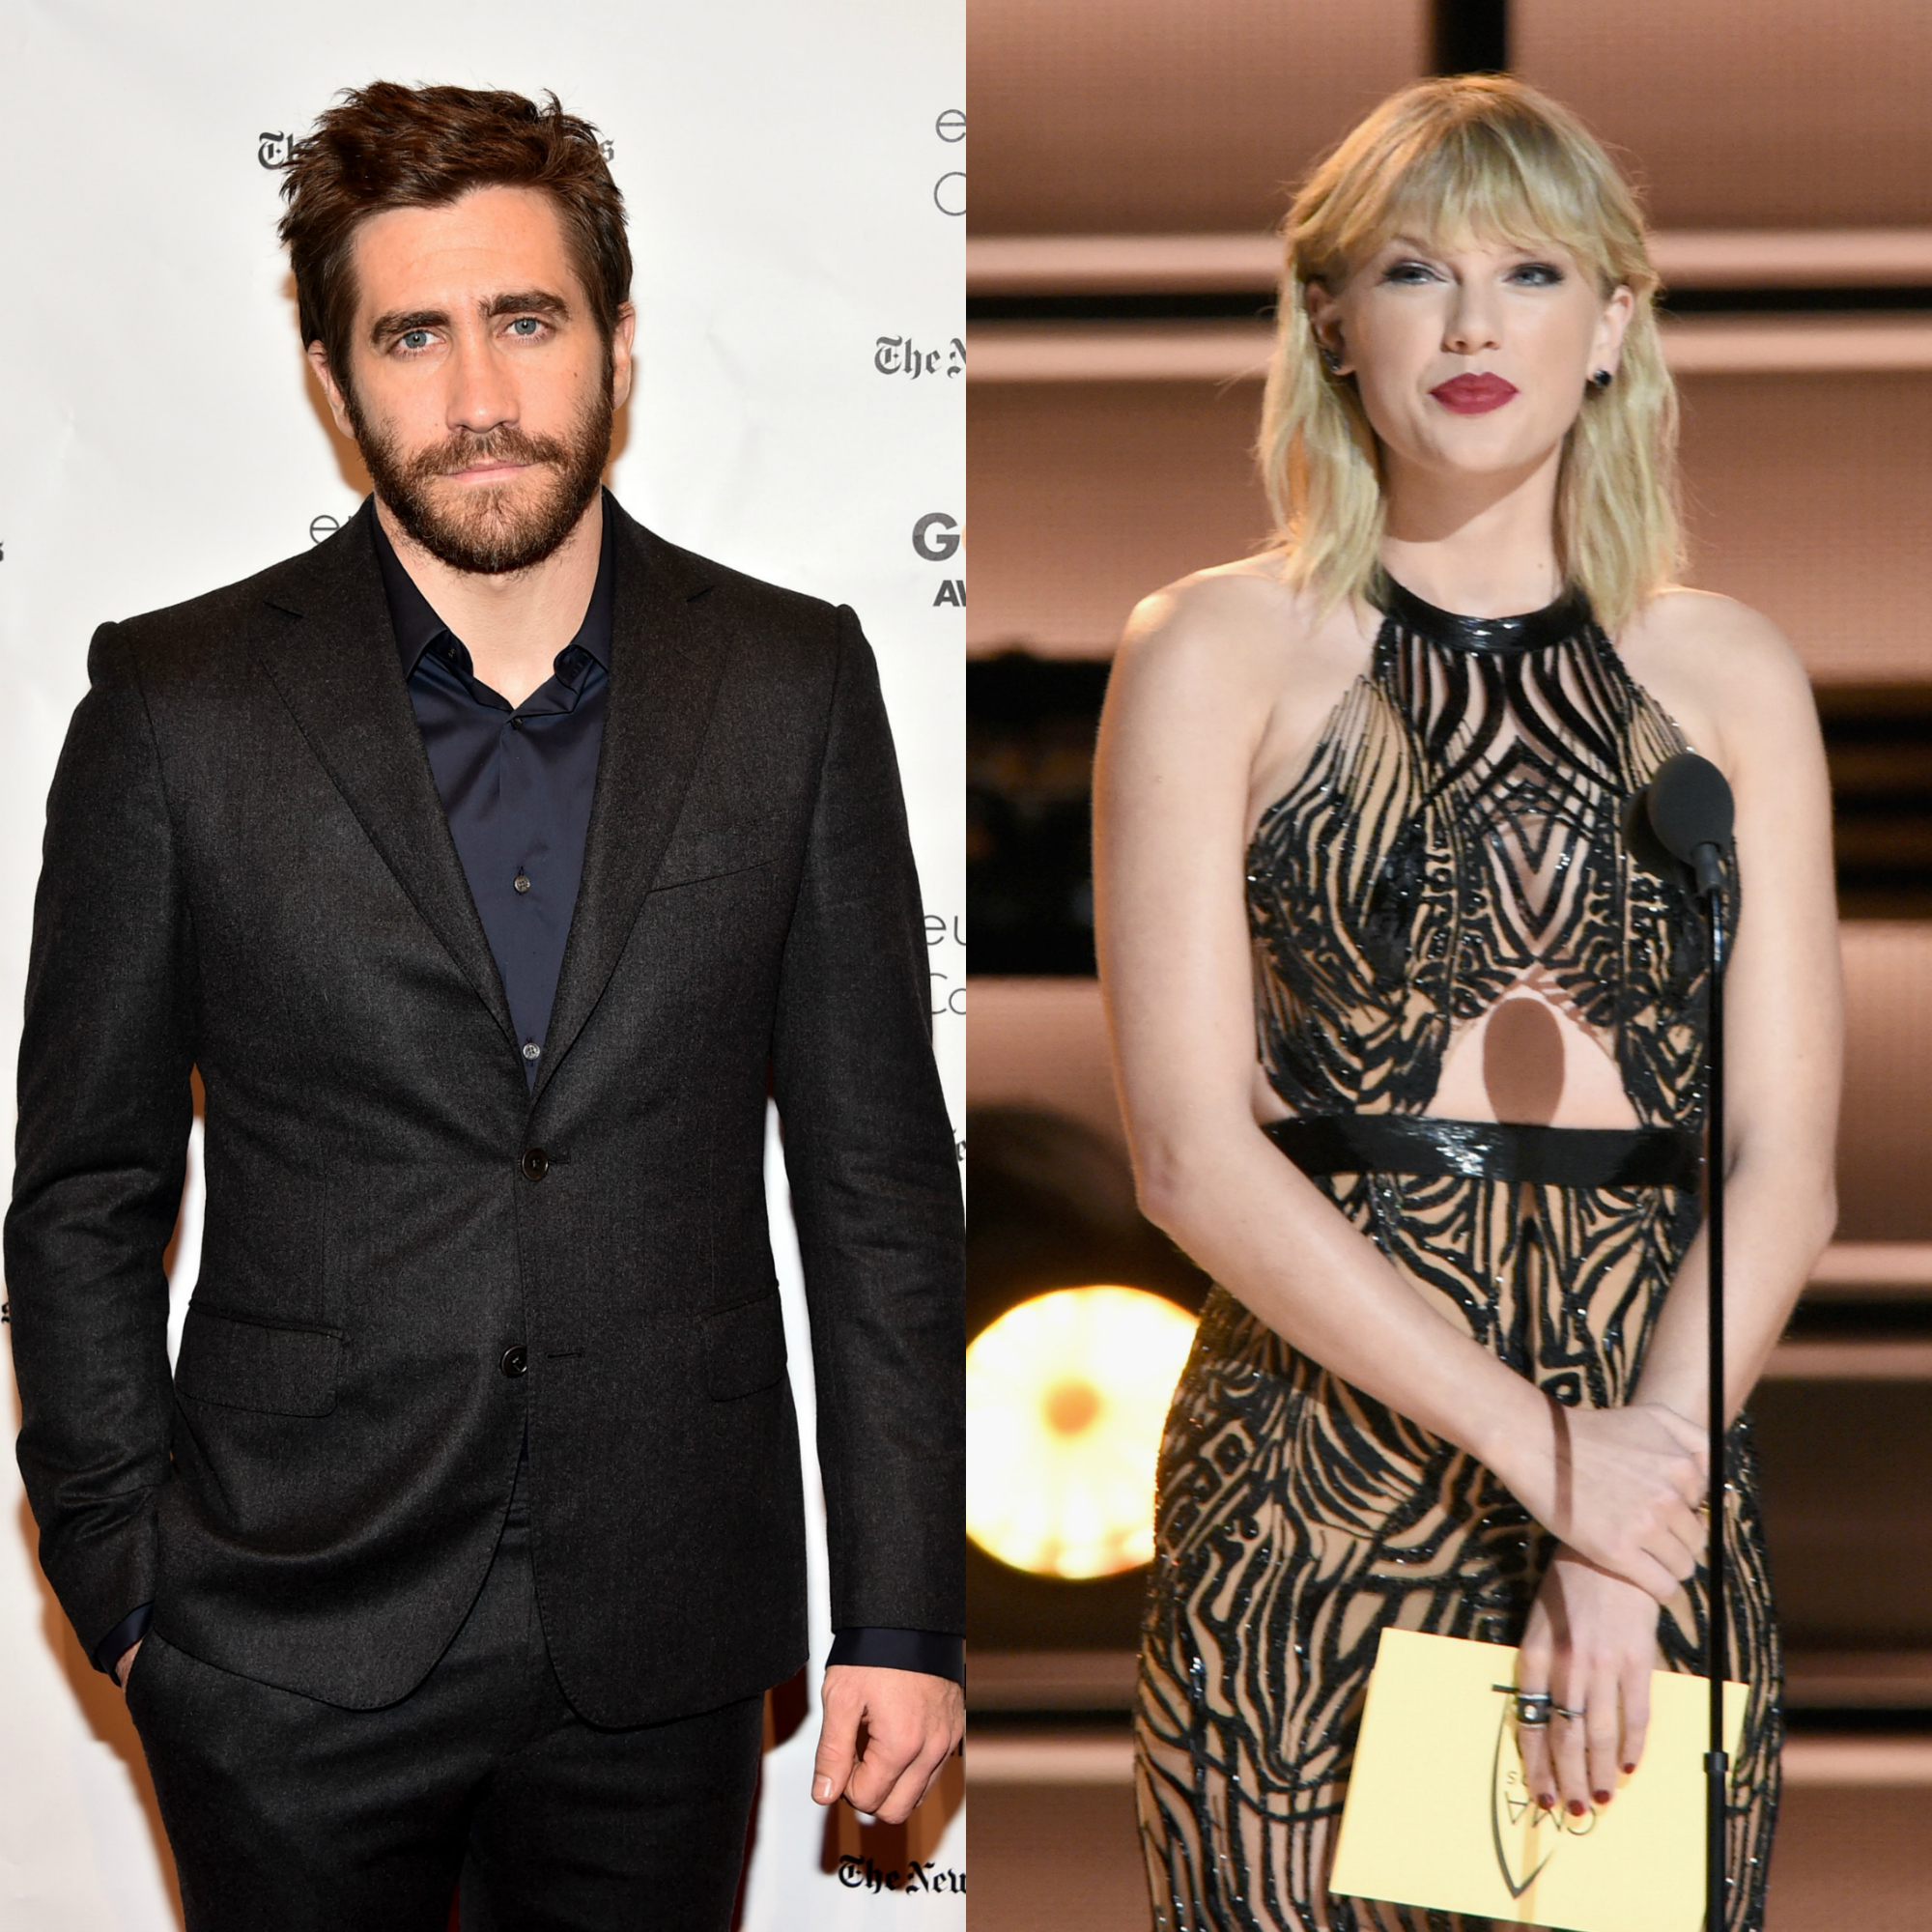 Jake Gyllenhaal Reacts To Being Asked About Taylor Swift